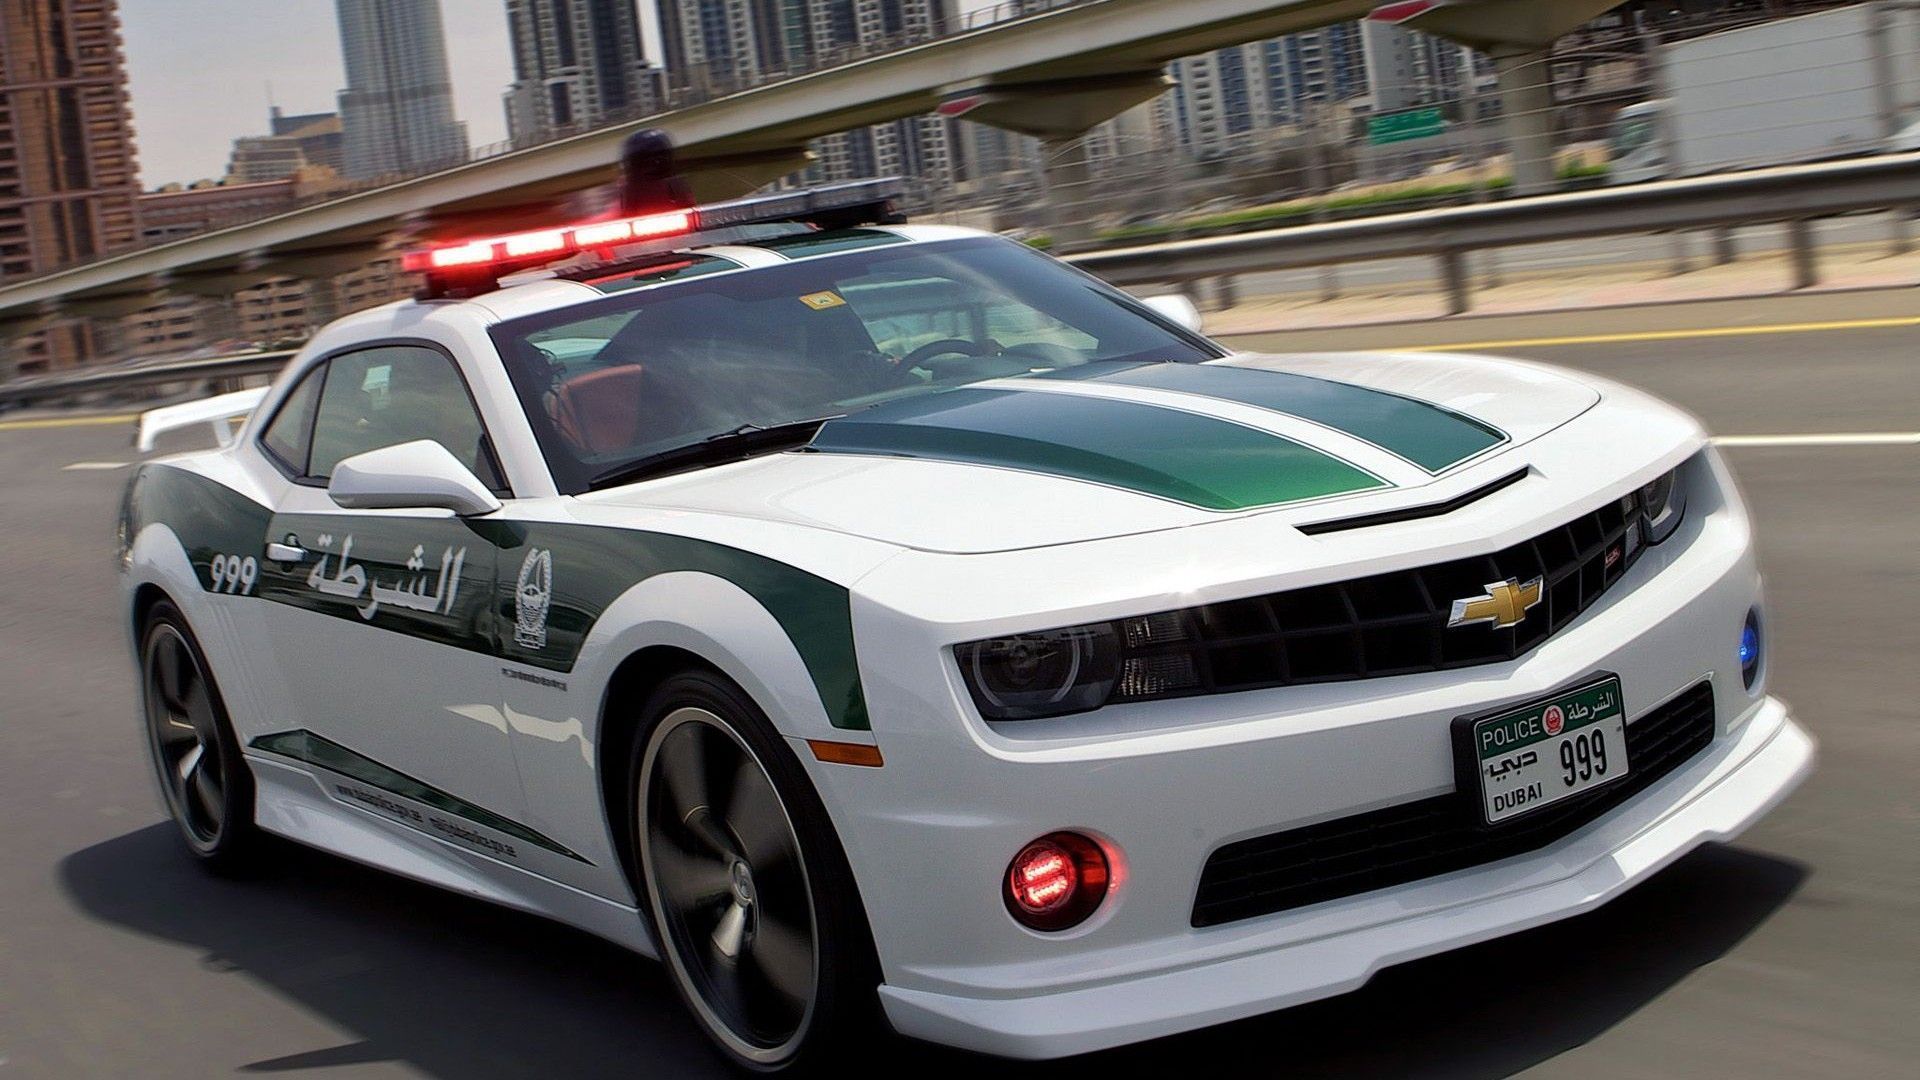 Police Car Backgrounds